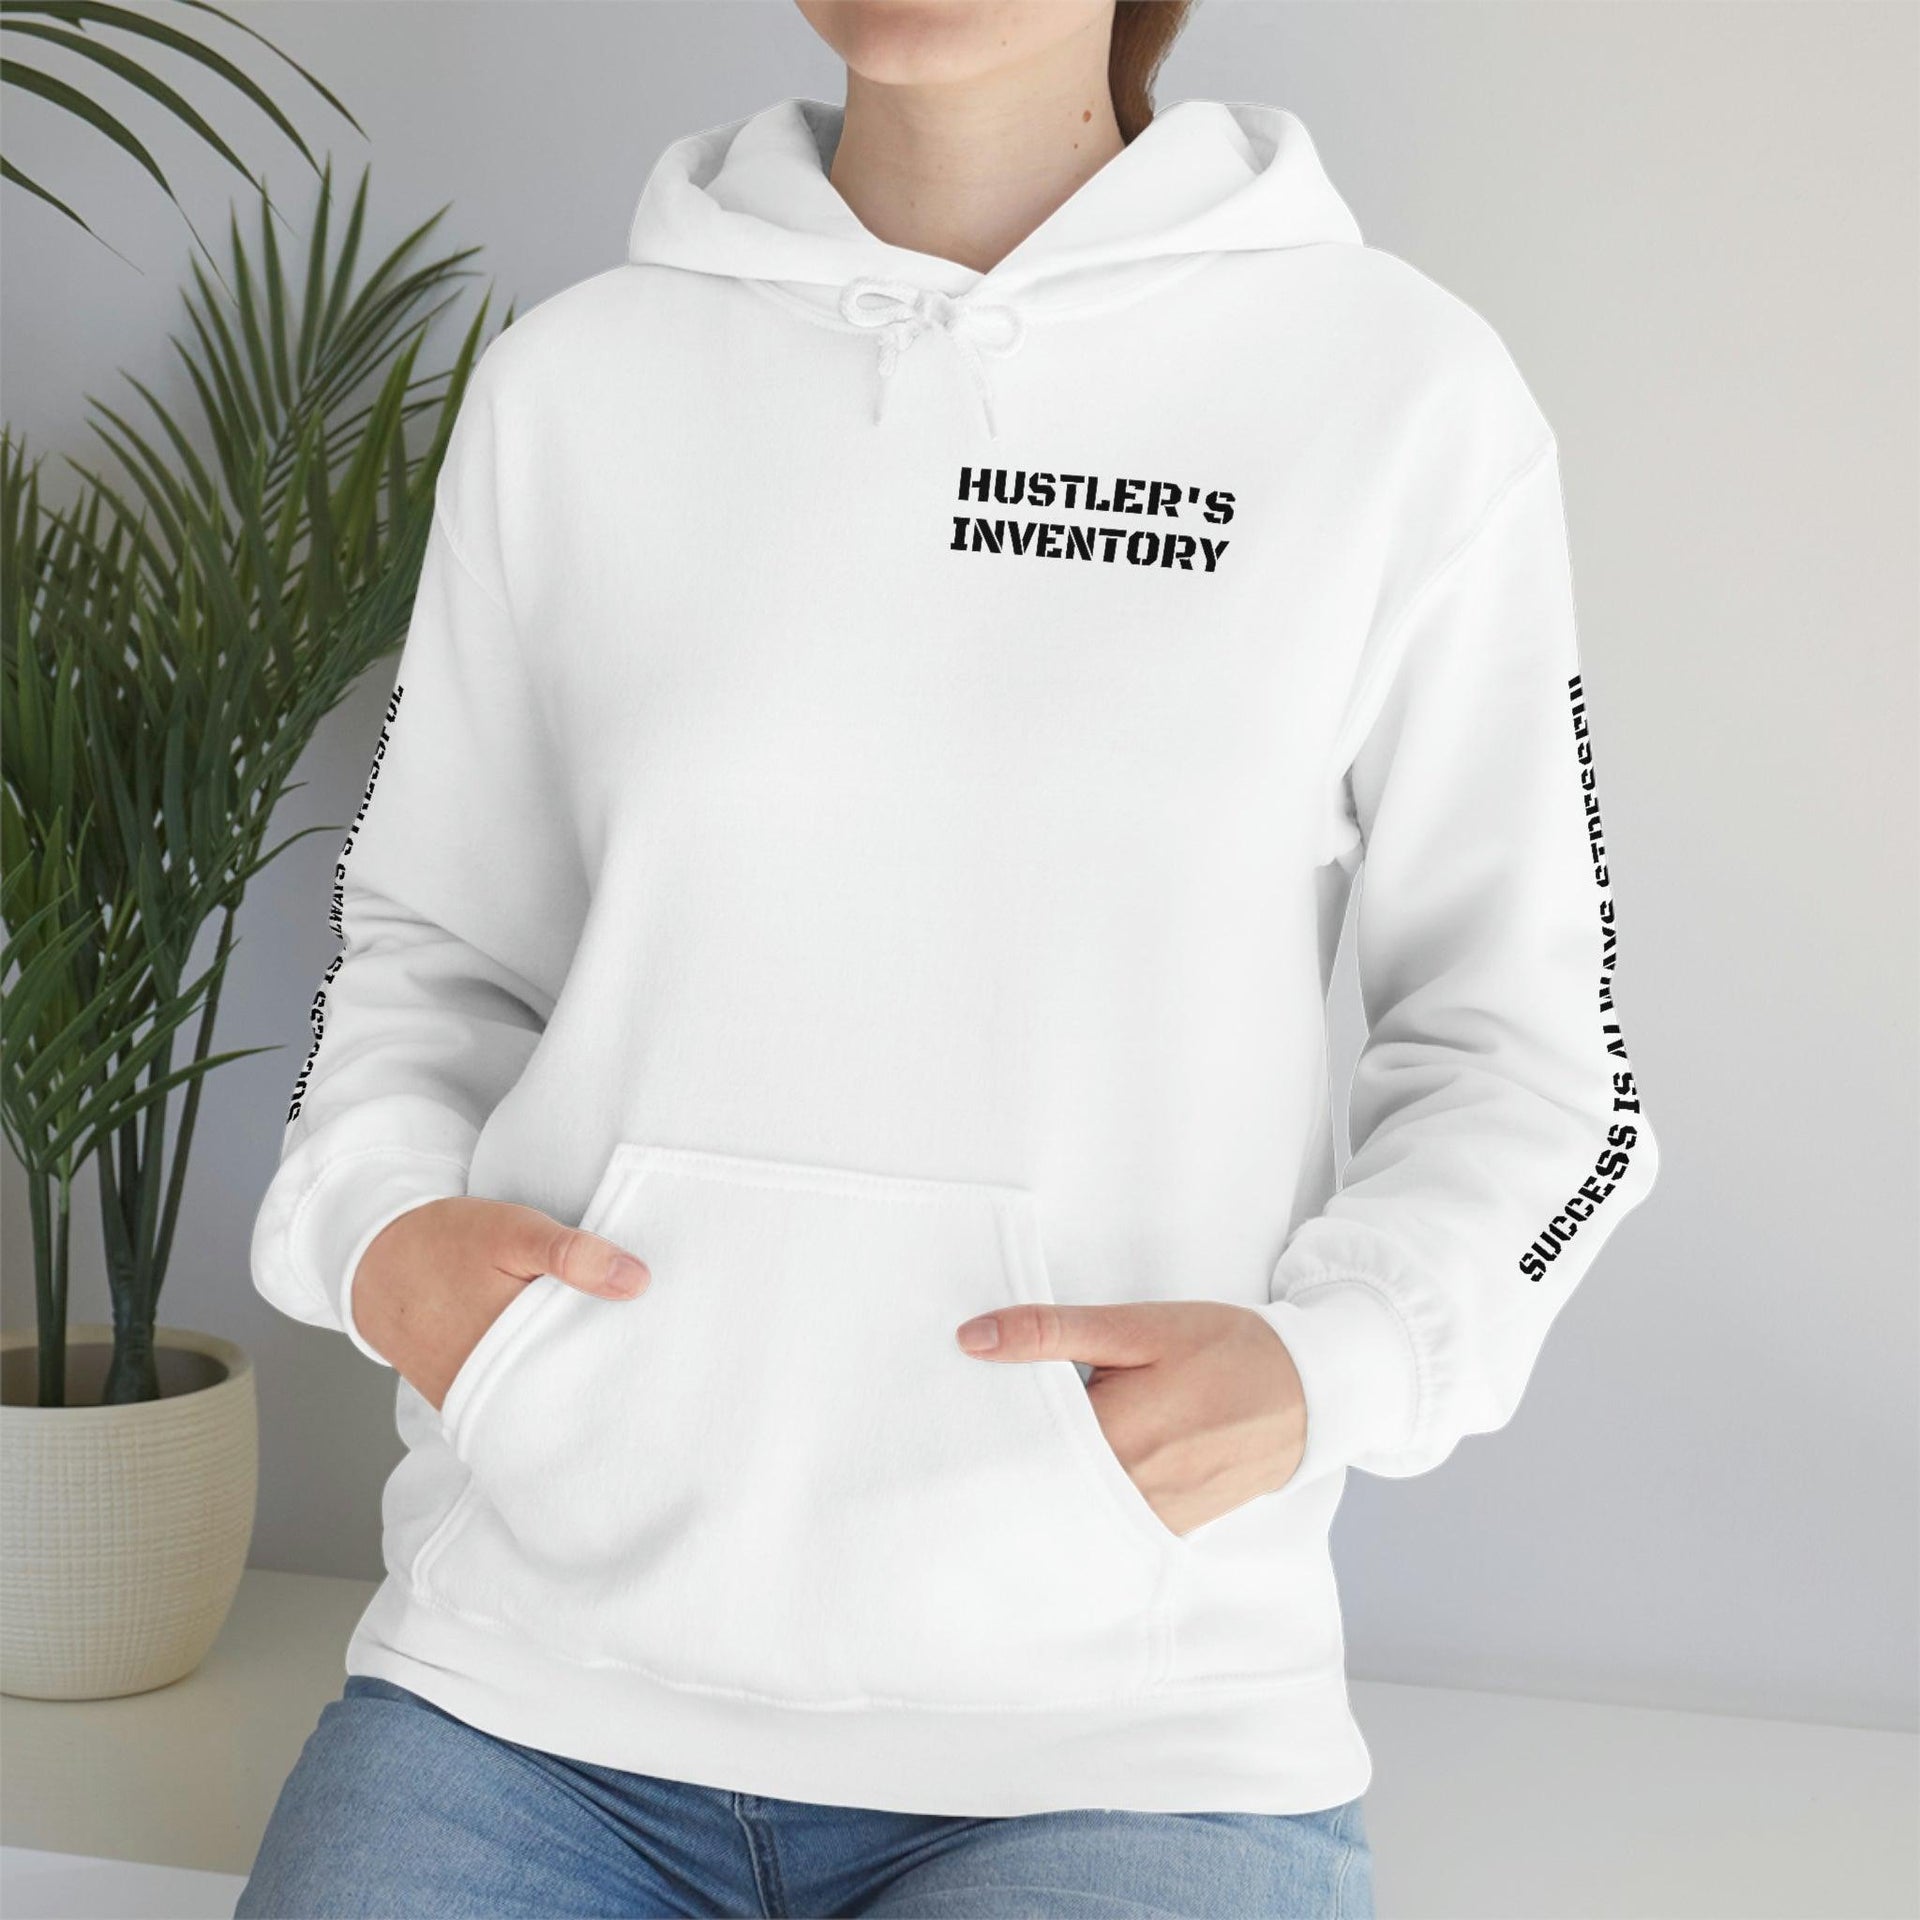 Stay focused on your goals with an Andrew Tate motivational sweatshirt featuring the quote 'Success is always stressful.' Available in a range of sizes and shipped worldwide at low prices.